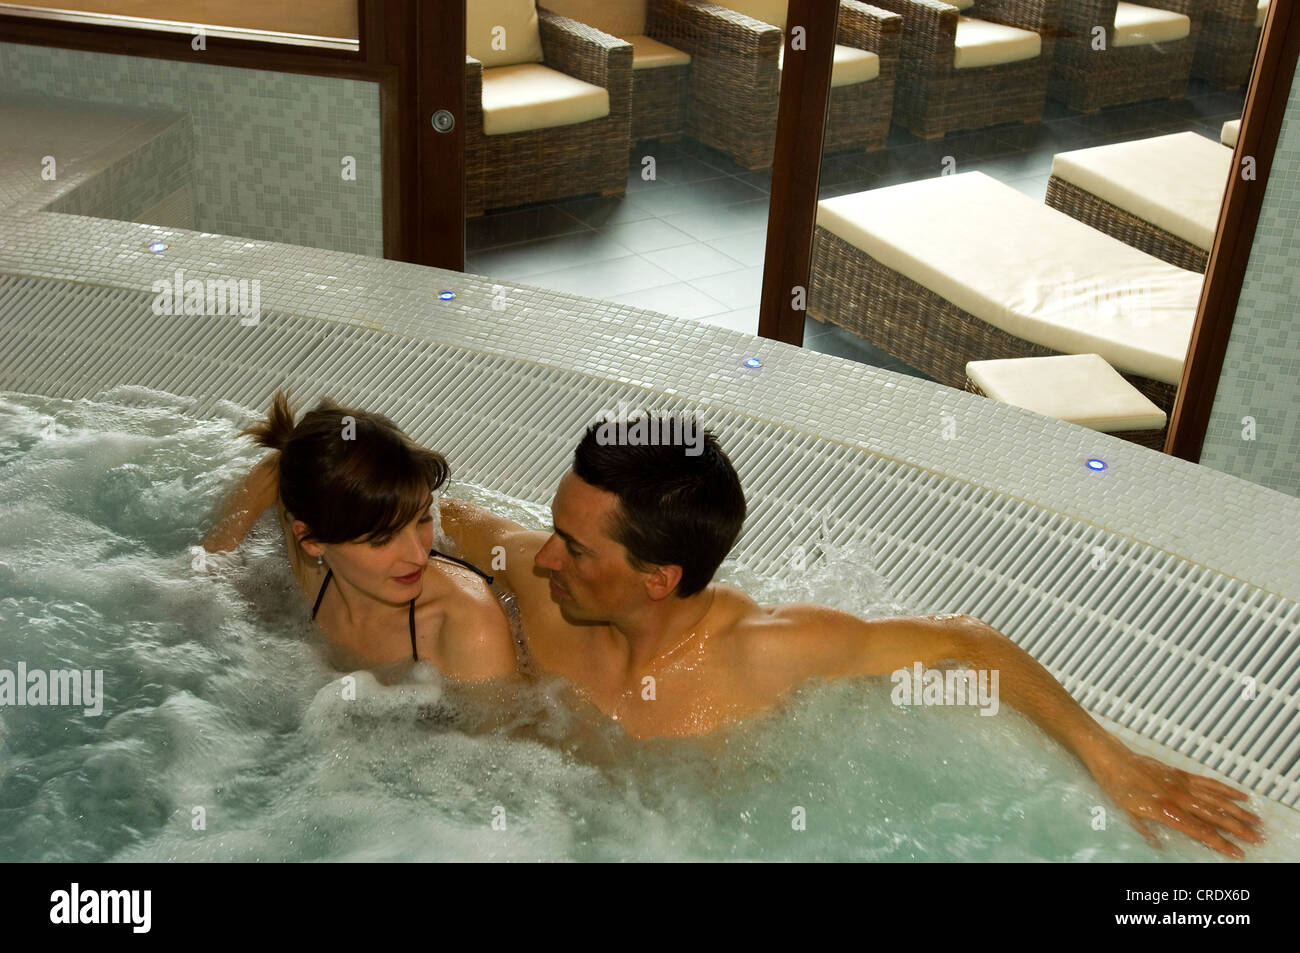 couple in a whirlpool Stock Photo